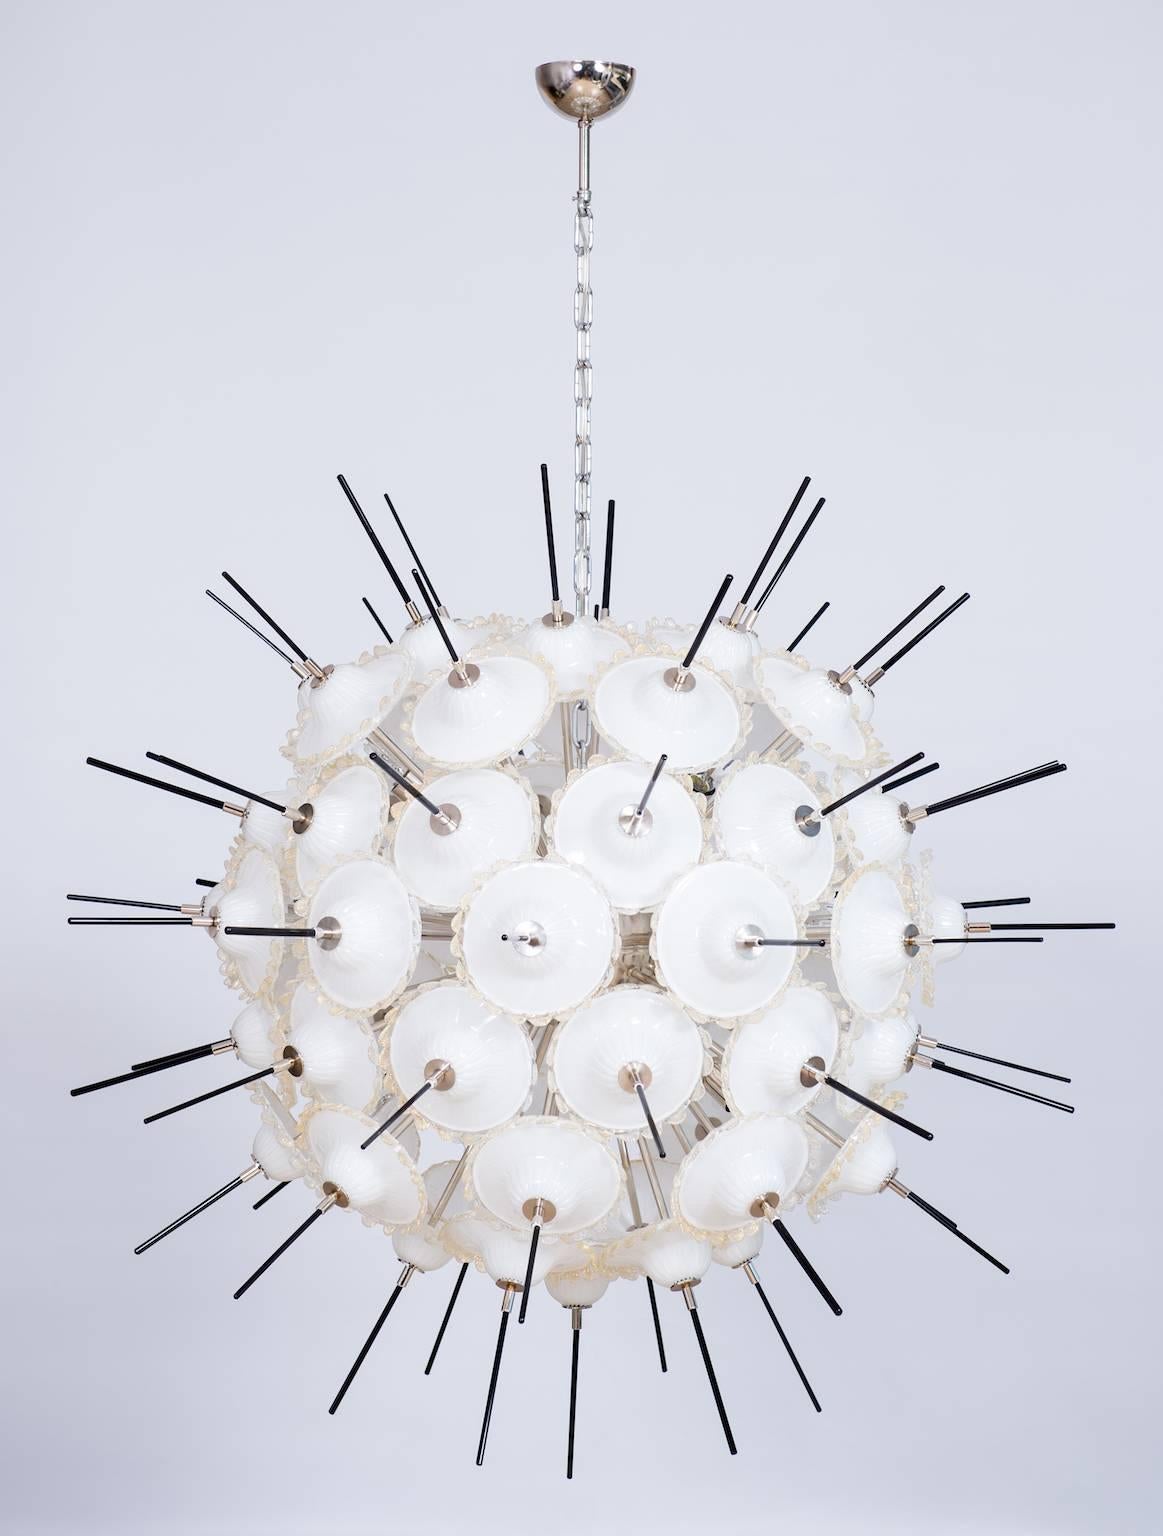 Italian Sputnik chandelier in Murano glass, composed of white circular glass elements with a 24-karat gold edge, and with in the middle a black glass stem, all is supported by an elegant chrome frame. The chandelier is made in the Murano island of